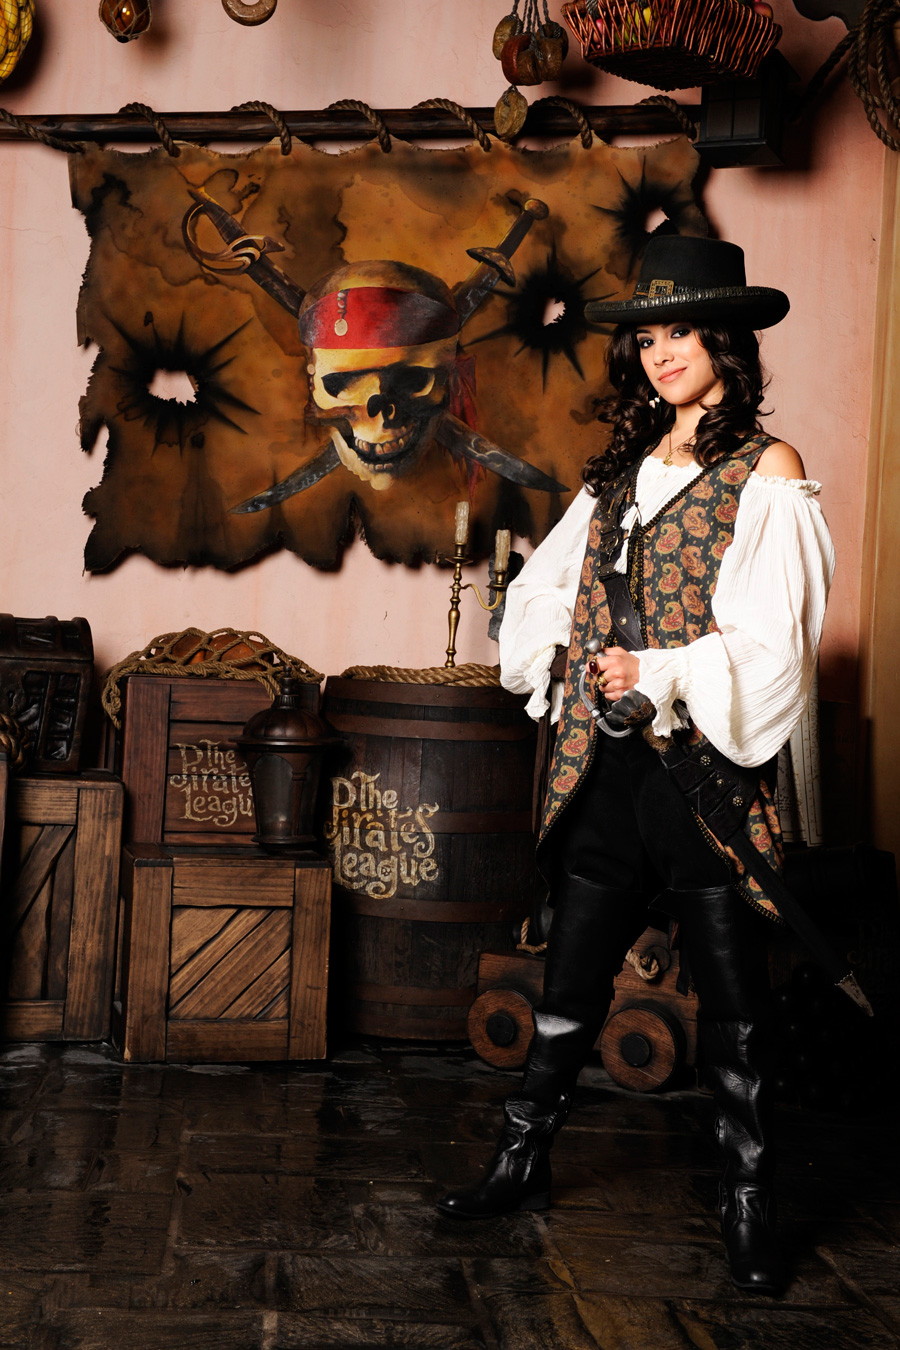 Angelica of 'Pirates of the Caribbean: On Stranger Tides'